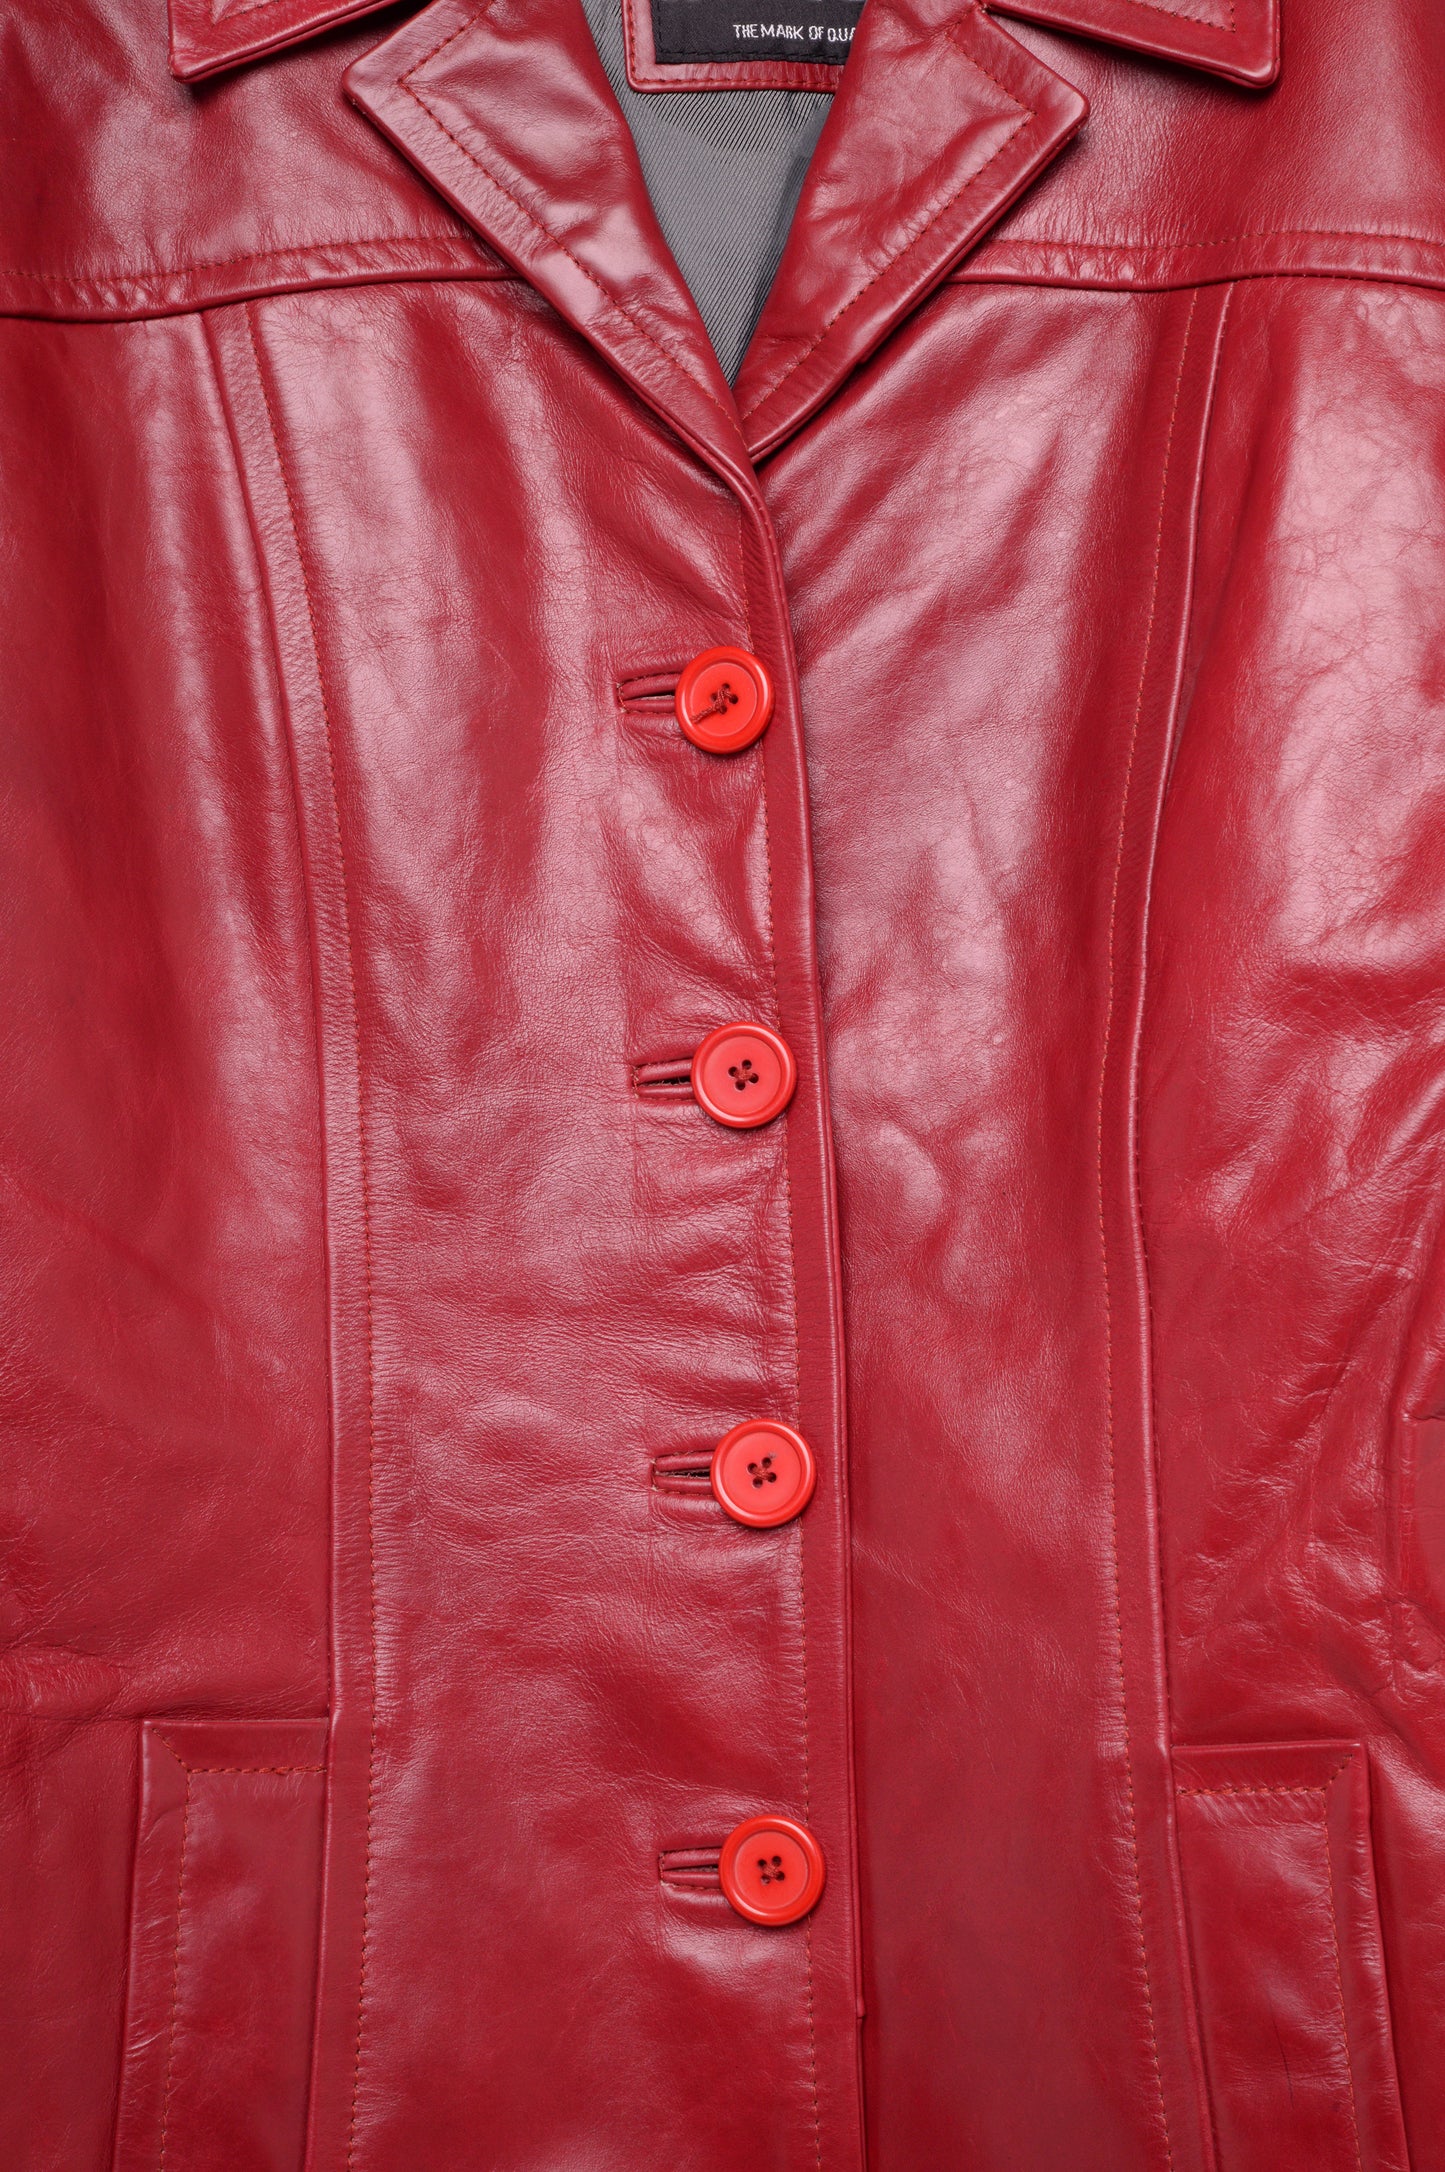 1990s Cherry Red Leather Jacket